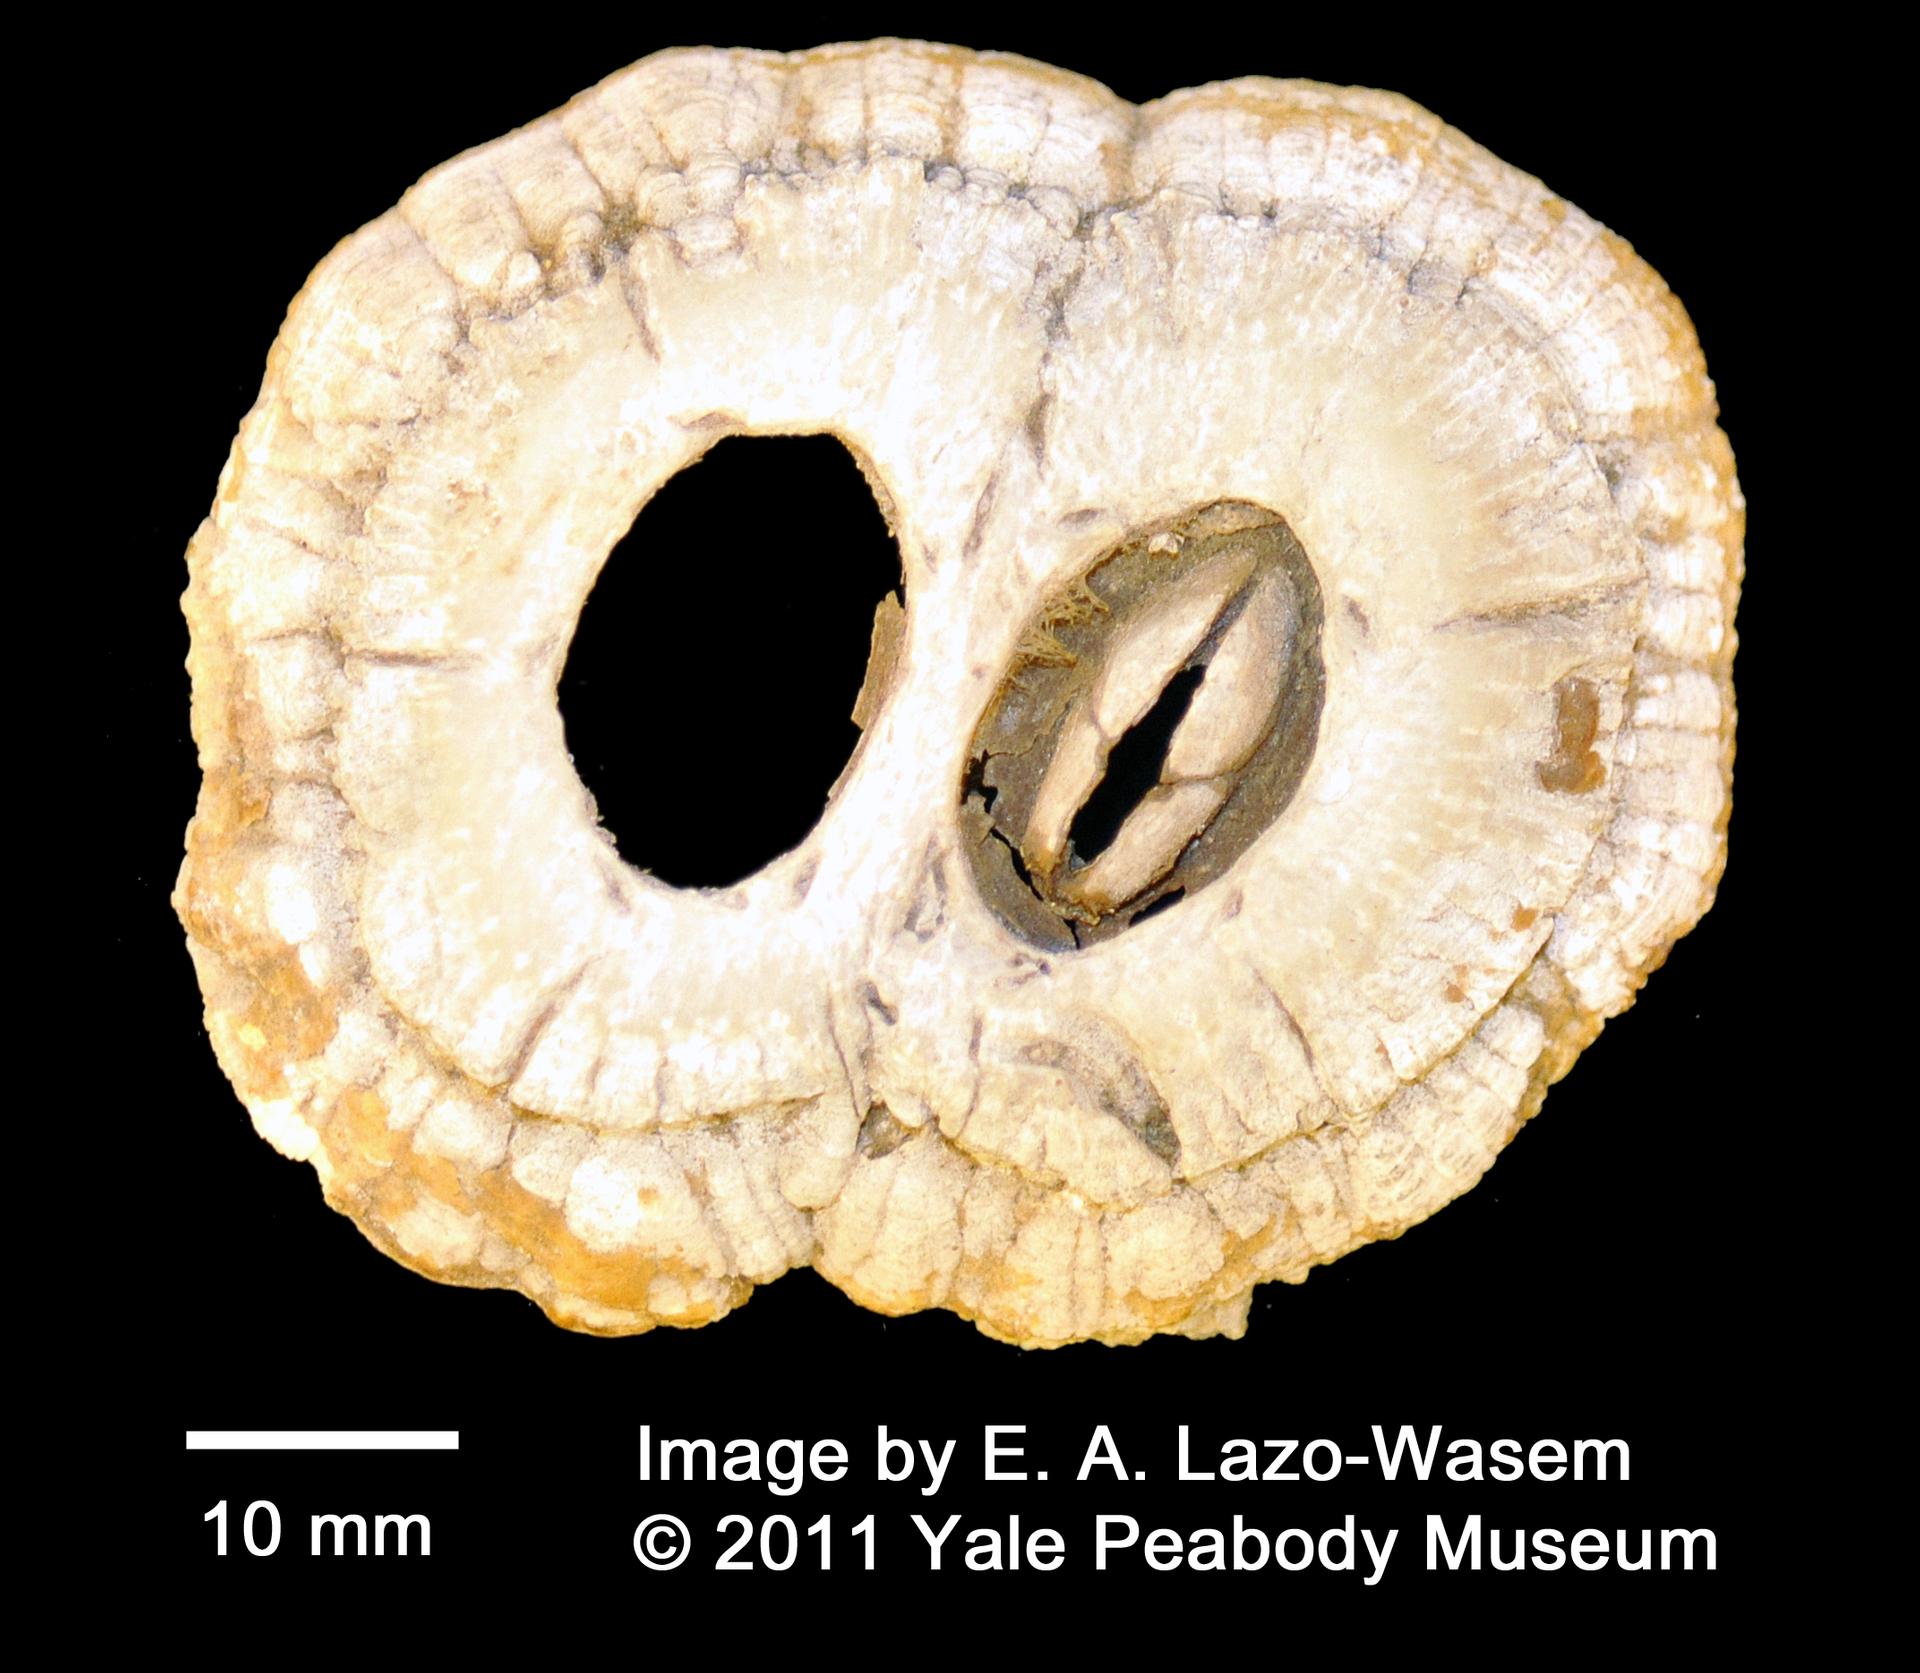 To Yale Peabody Museum of Natural History (YPM IZ 002732.CR)